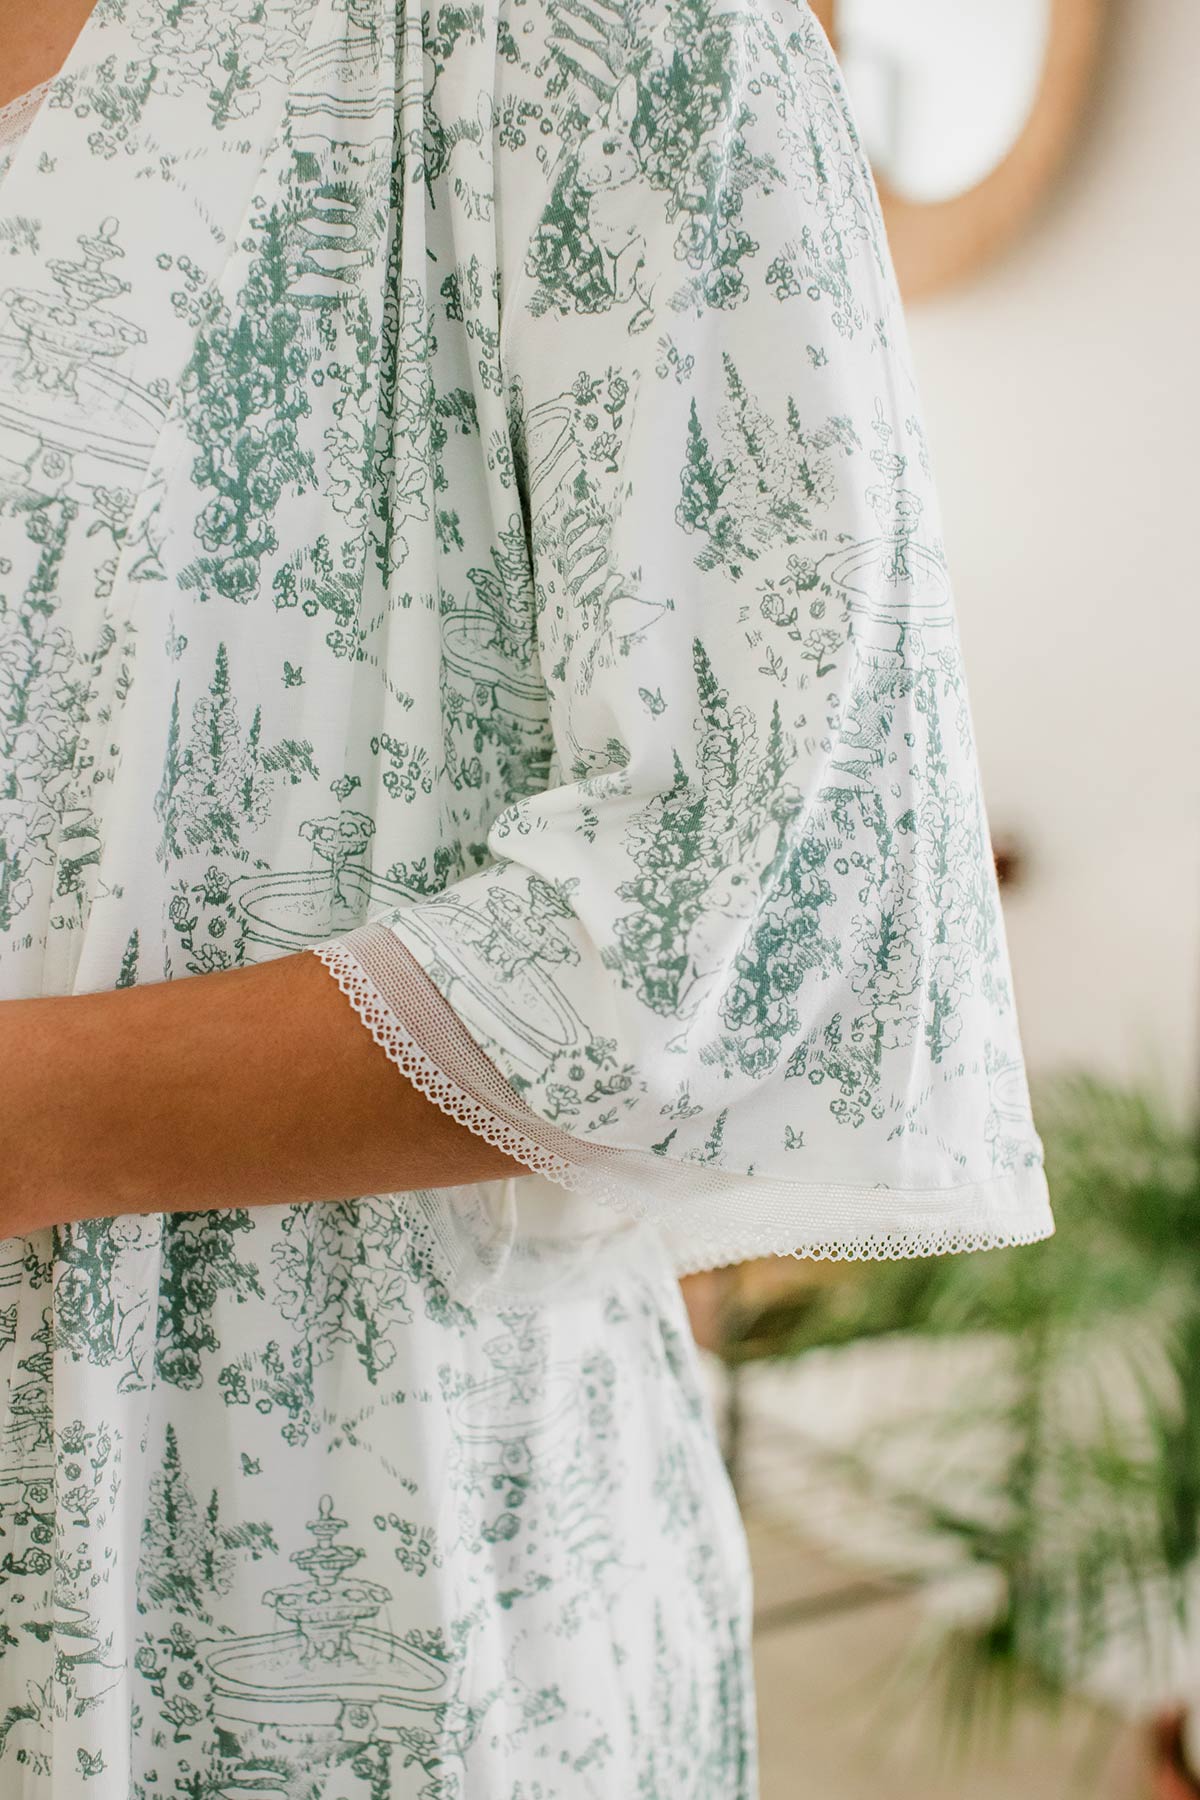 A close shot of a woman's elbow, showcasing the lace hem, wearing Iris Kimono Sleeve Belted Bamboo Lace Robe in English Garden Print